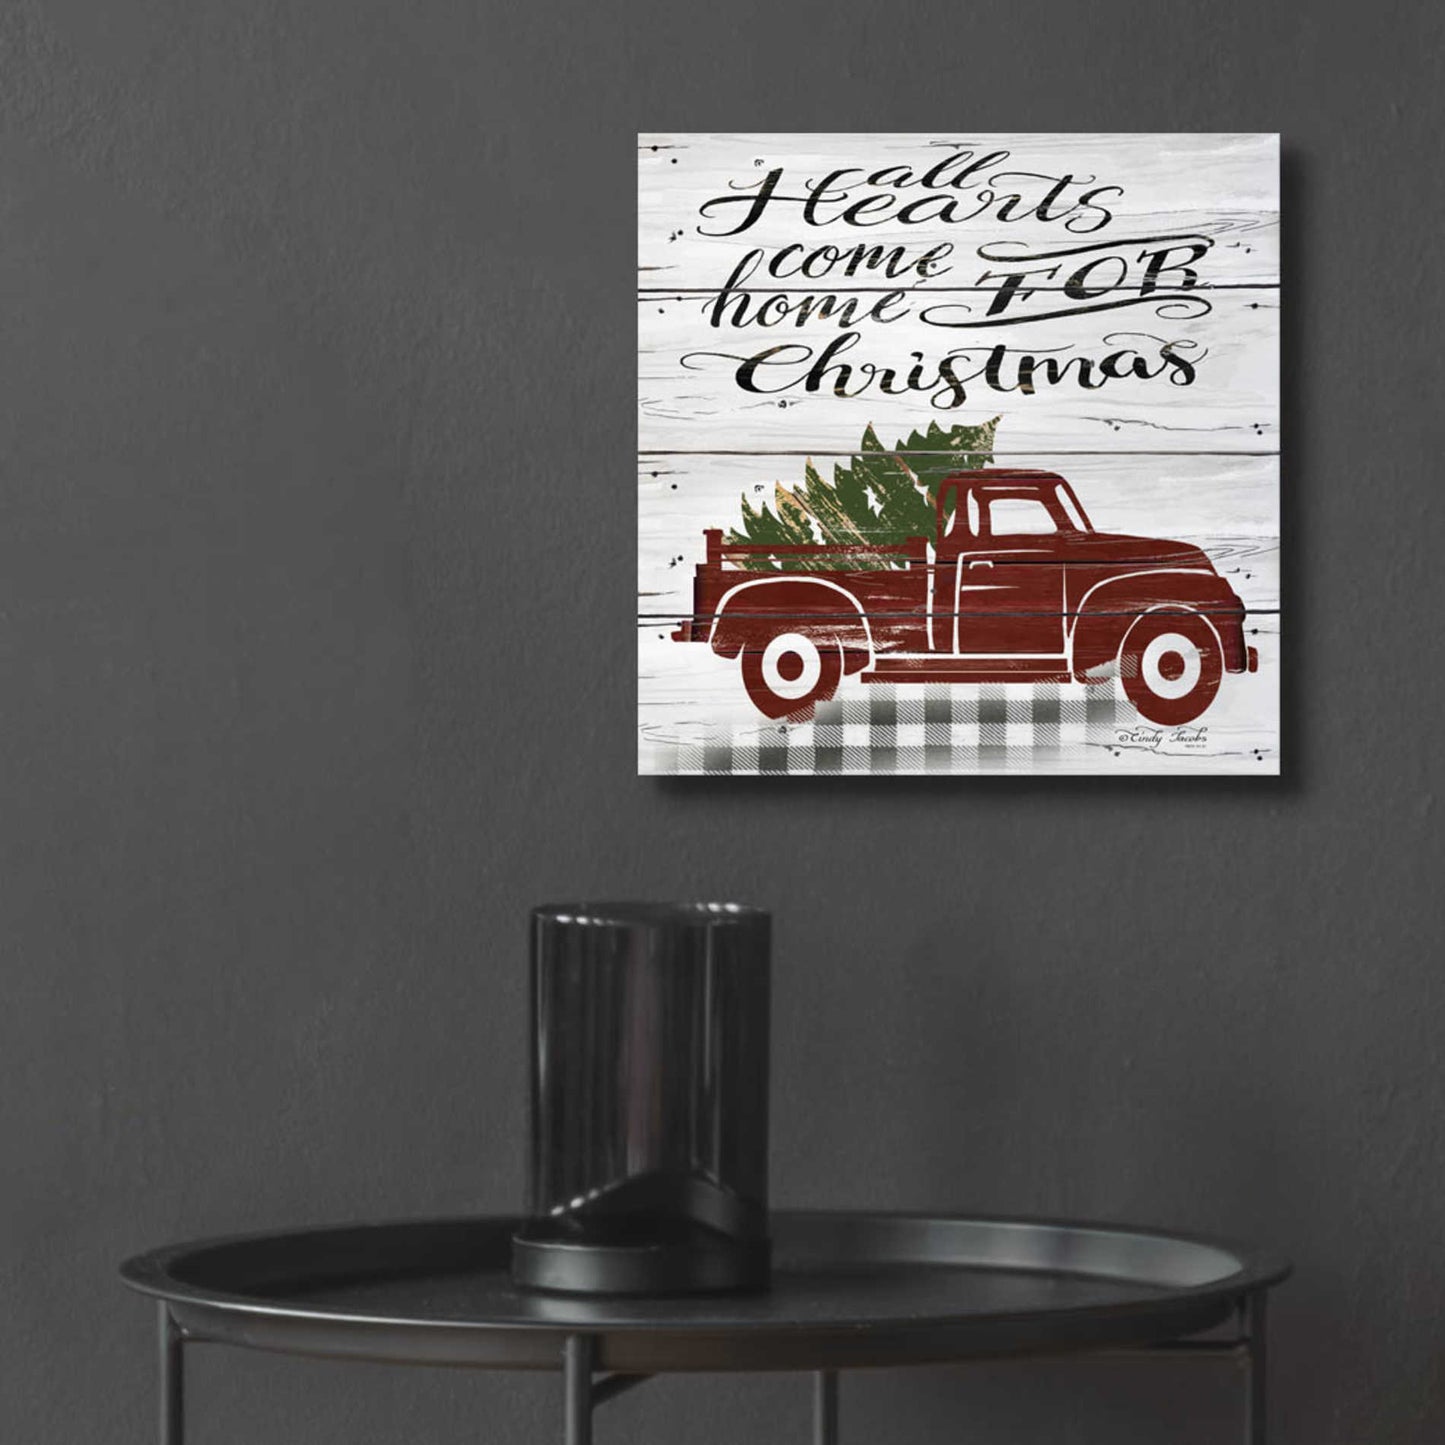 Epic Art 'All Hearts Red Truck' by Cindy Jacobs, Acrylic Glass Wall Art,12x12